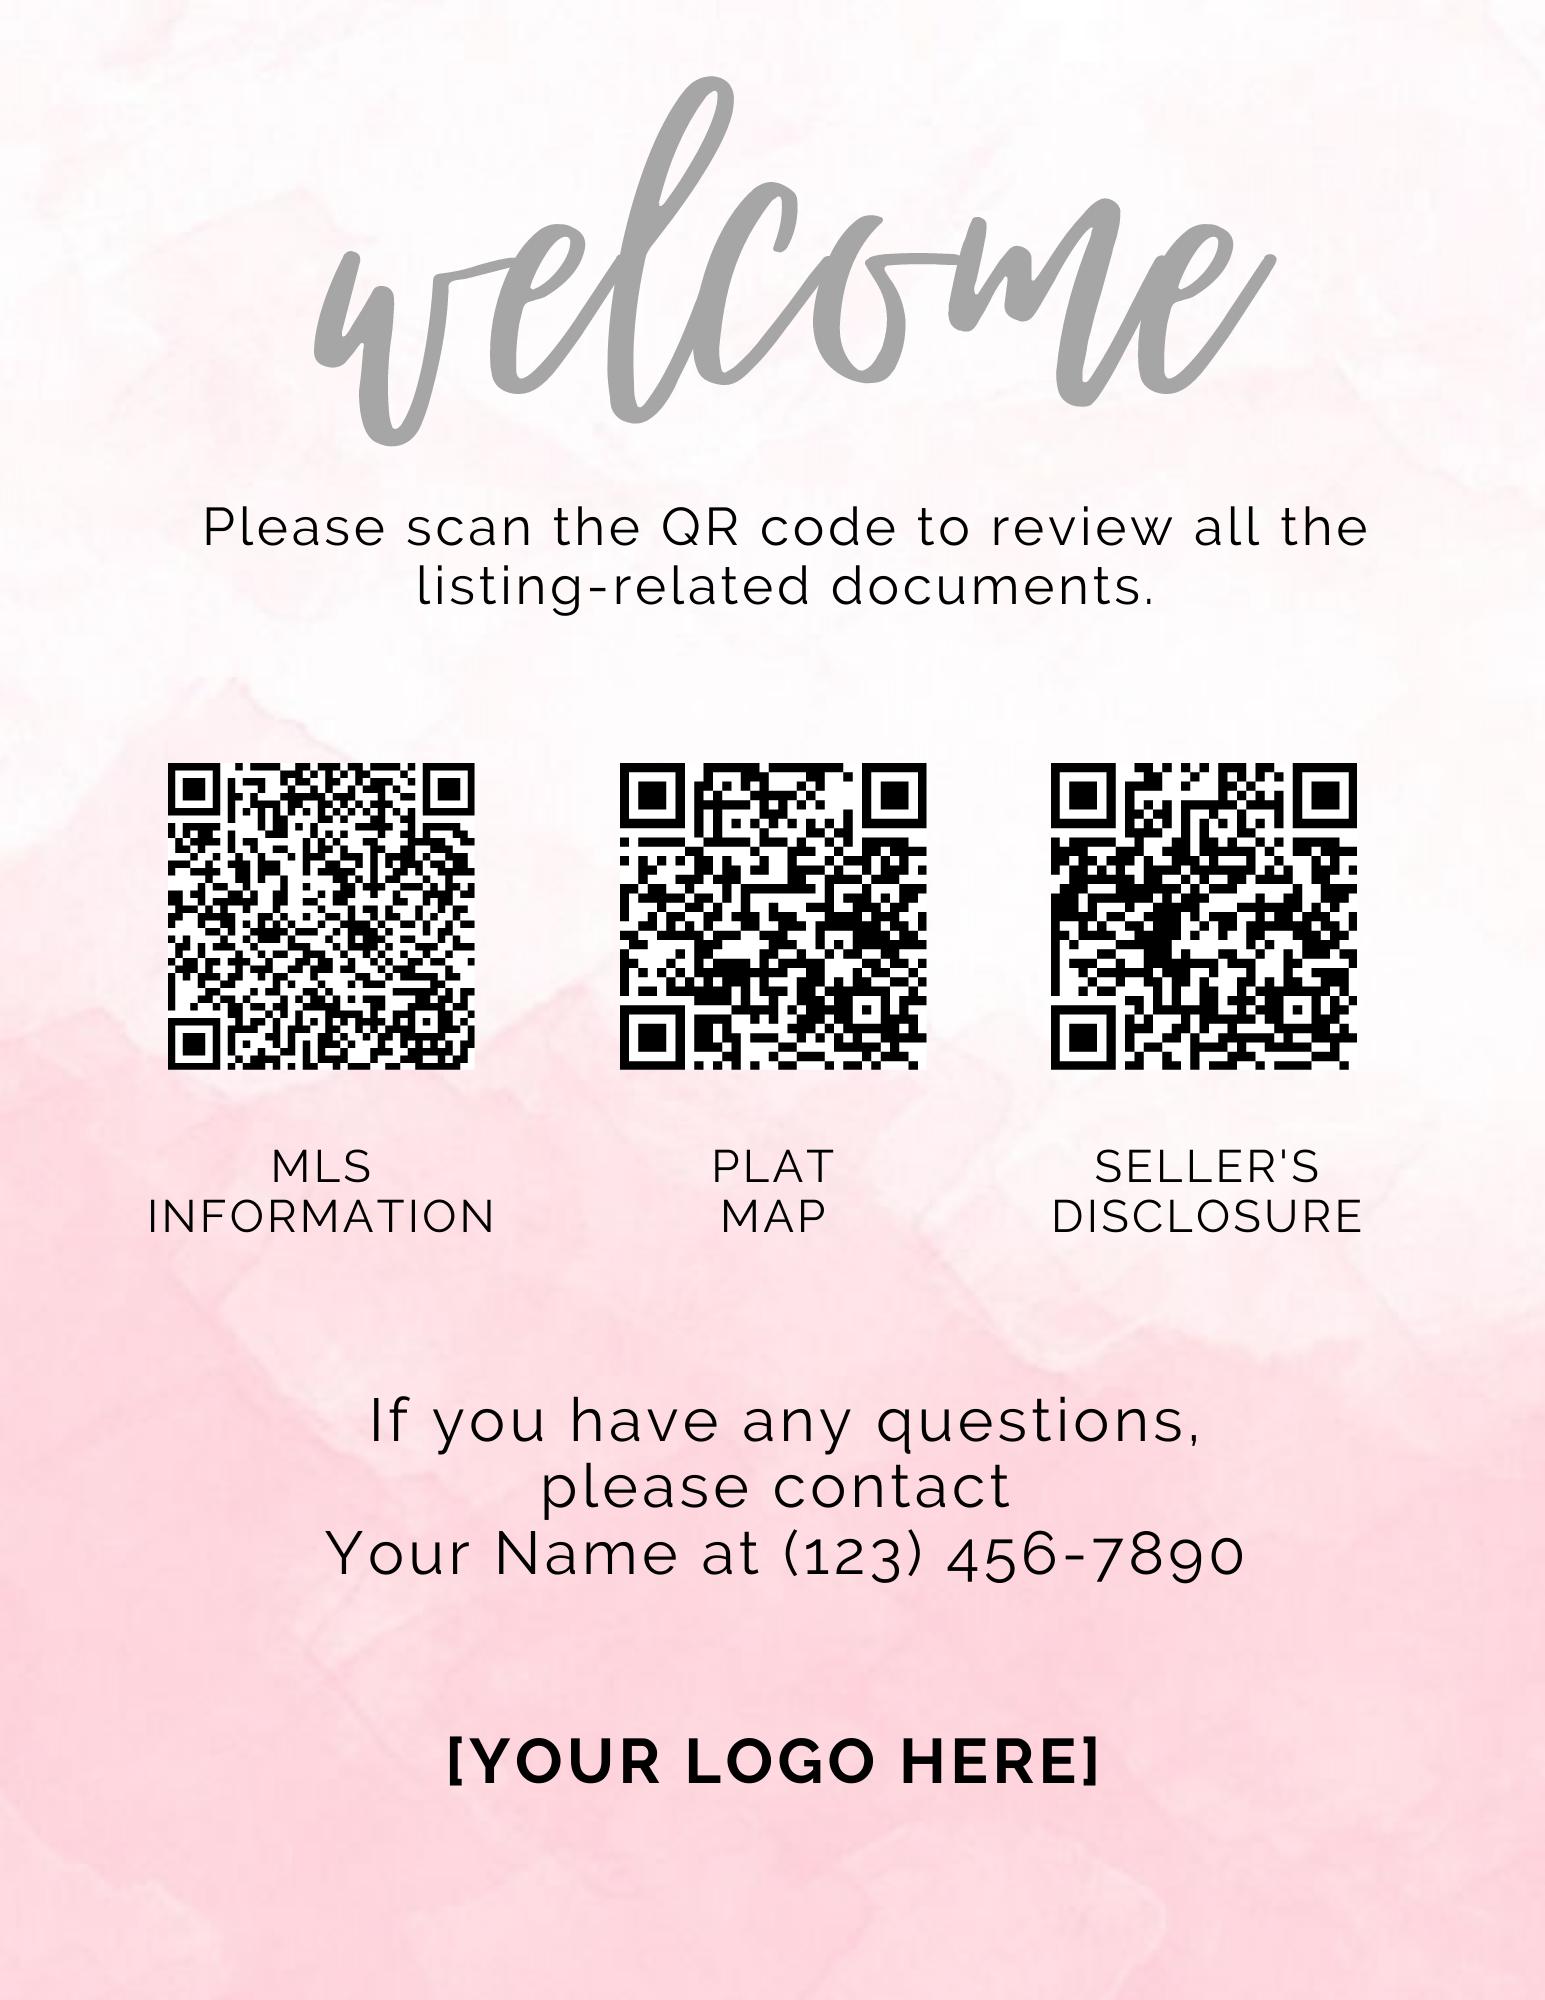 Real Estate QR Code Listing Flyer, Open House QR Code, Real Estate Marketing, Realtor QR Code, Real Estate Template, Home Seller Guide, Canva